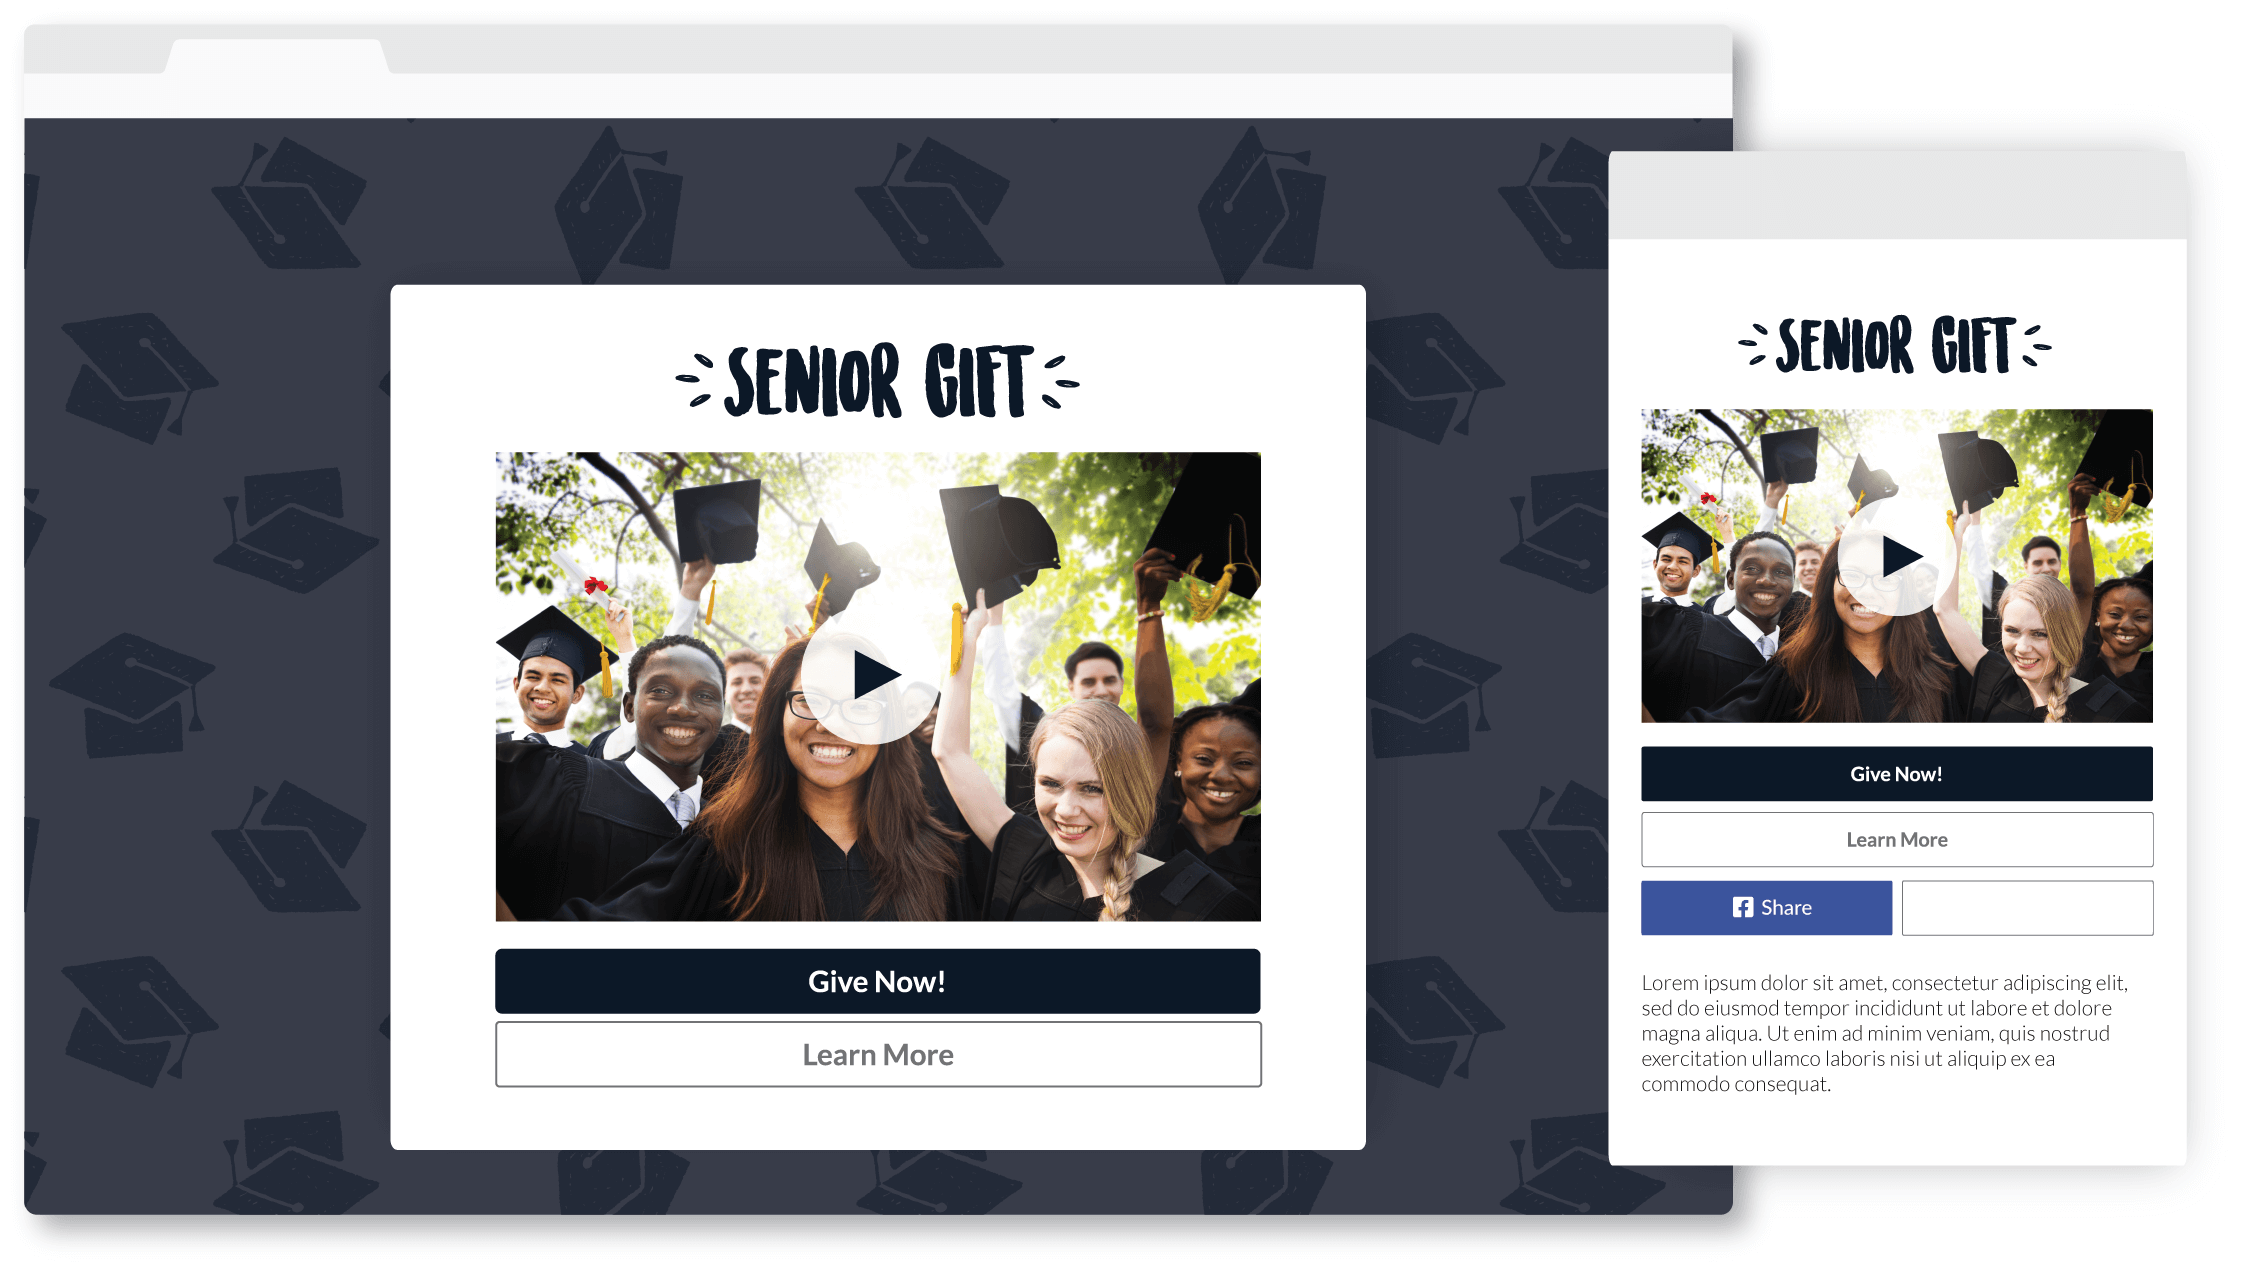 Senior Gift campaign landing page featuring video with Give Now, Learn More, and social share buttons.